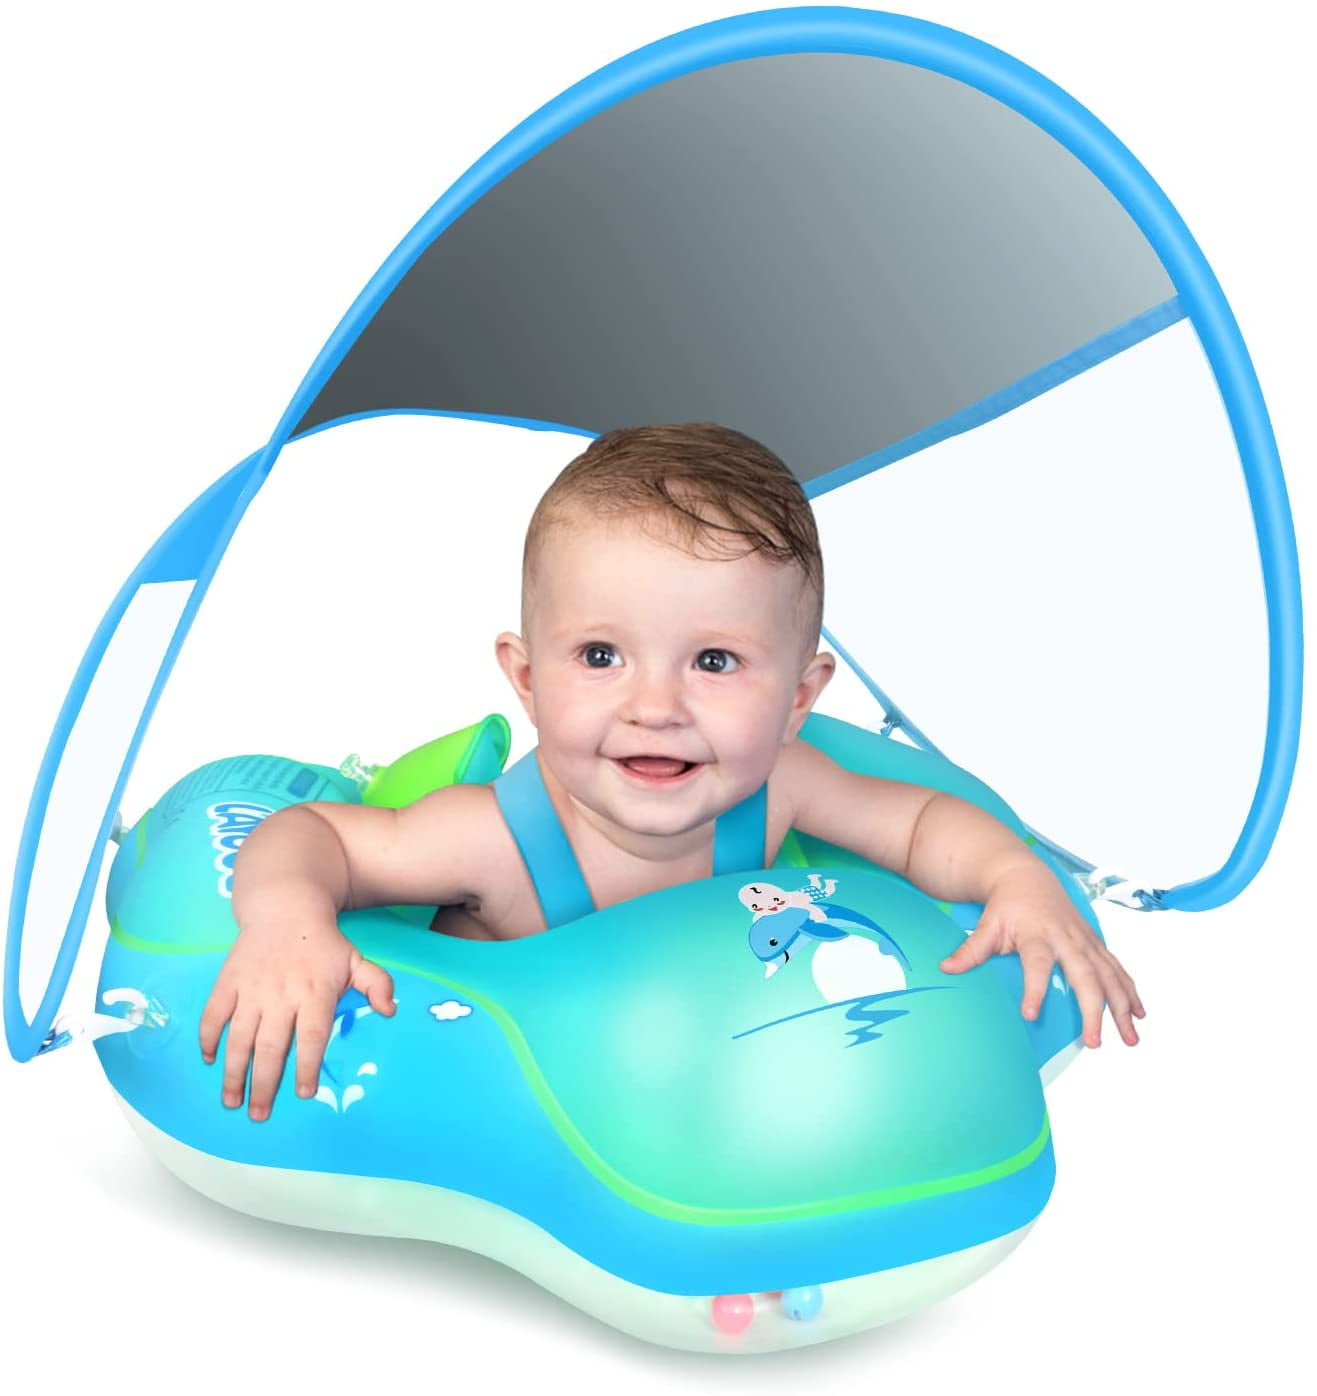 Swimways Baby Spring Float Sun Canopy Includes 5 Tethered Toys And Reusable C... 